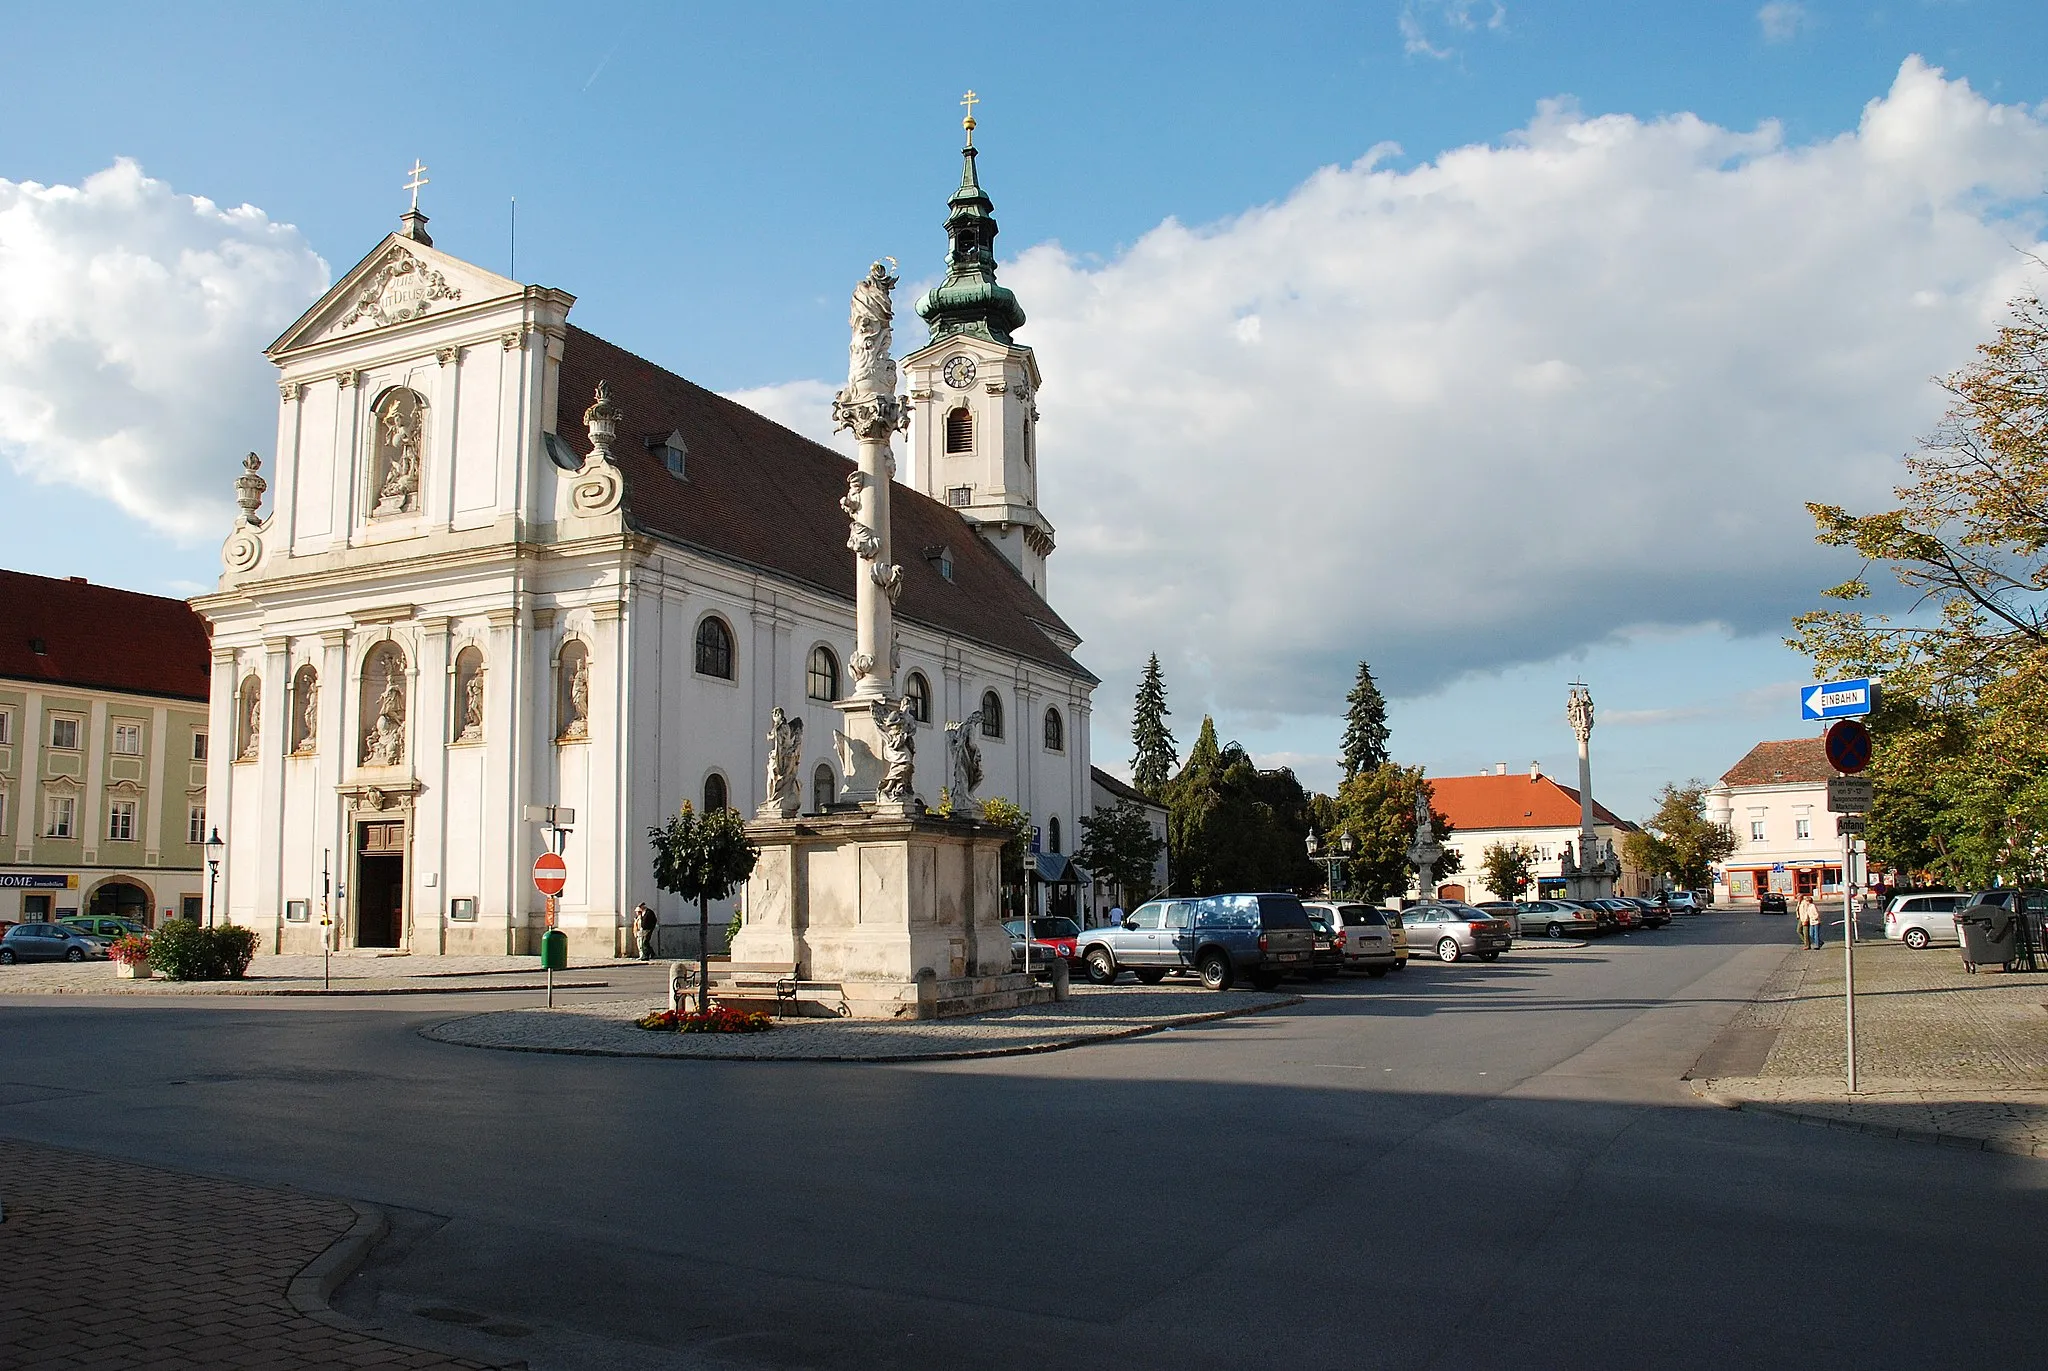 Photo showing: Main square of Bruck an der Leitha with church. In the foreground stands the column of Virgin Mary.